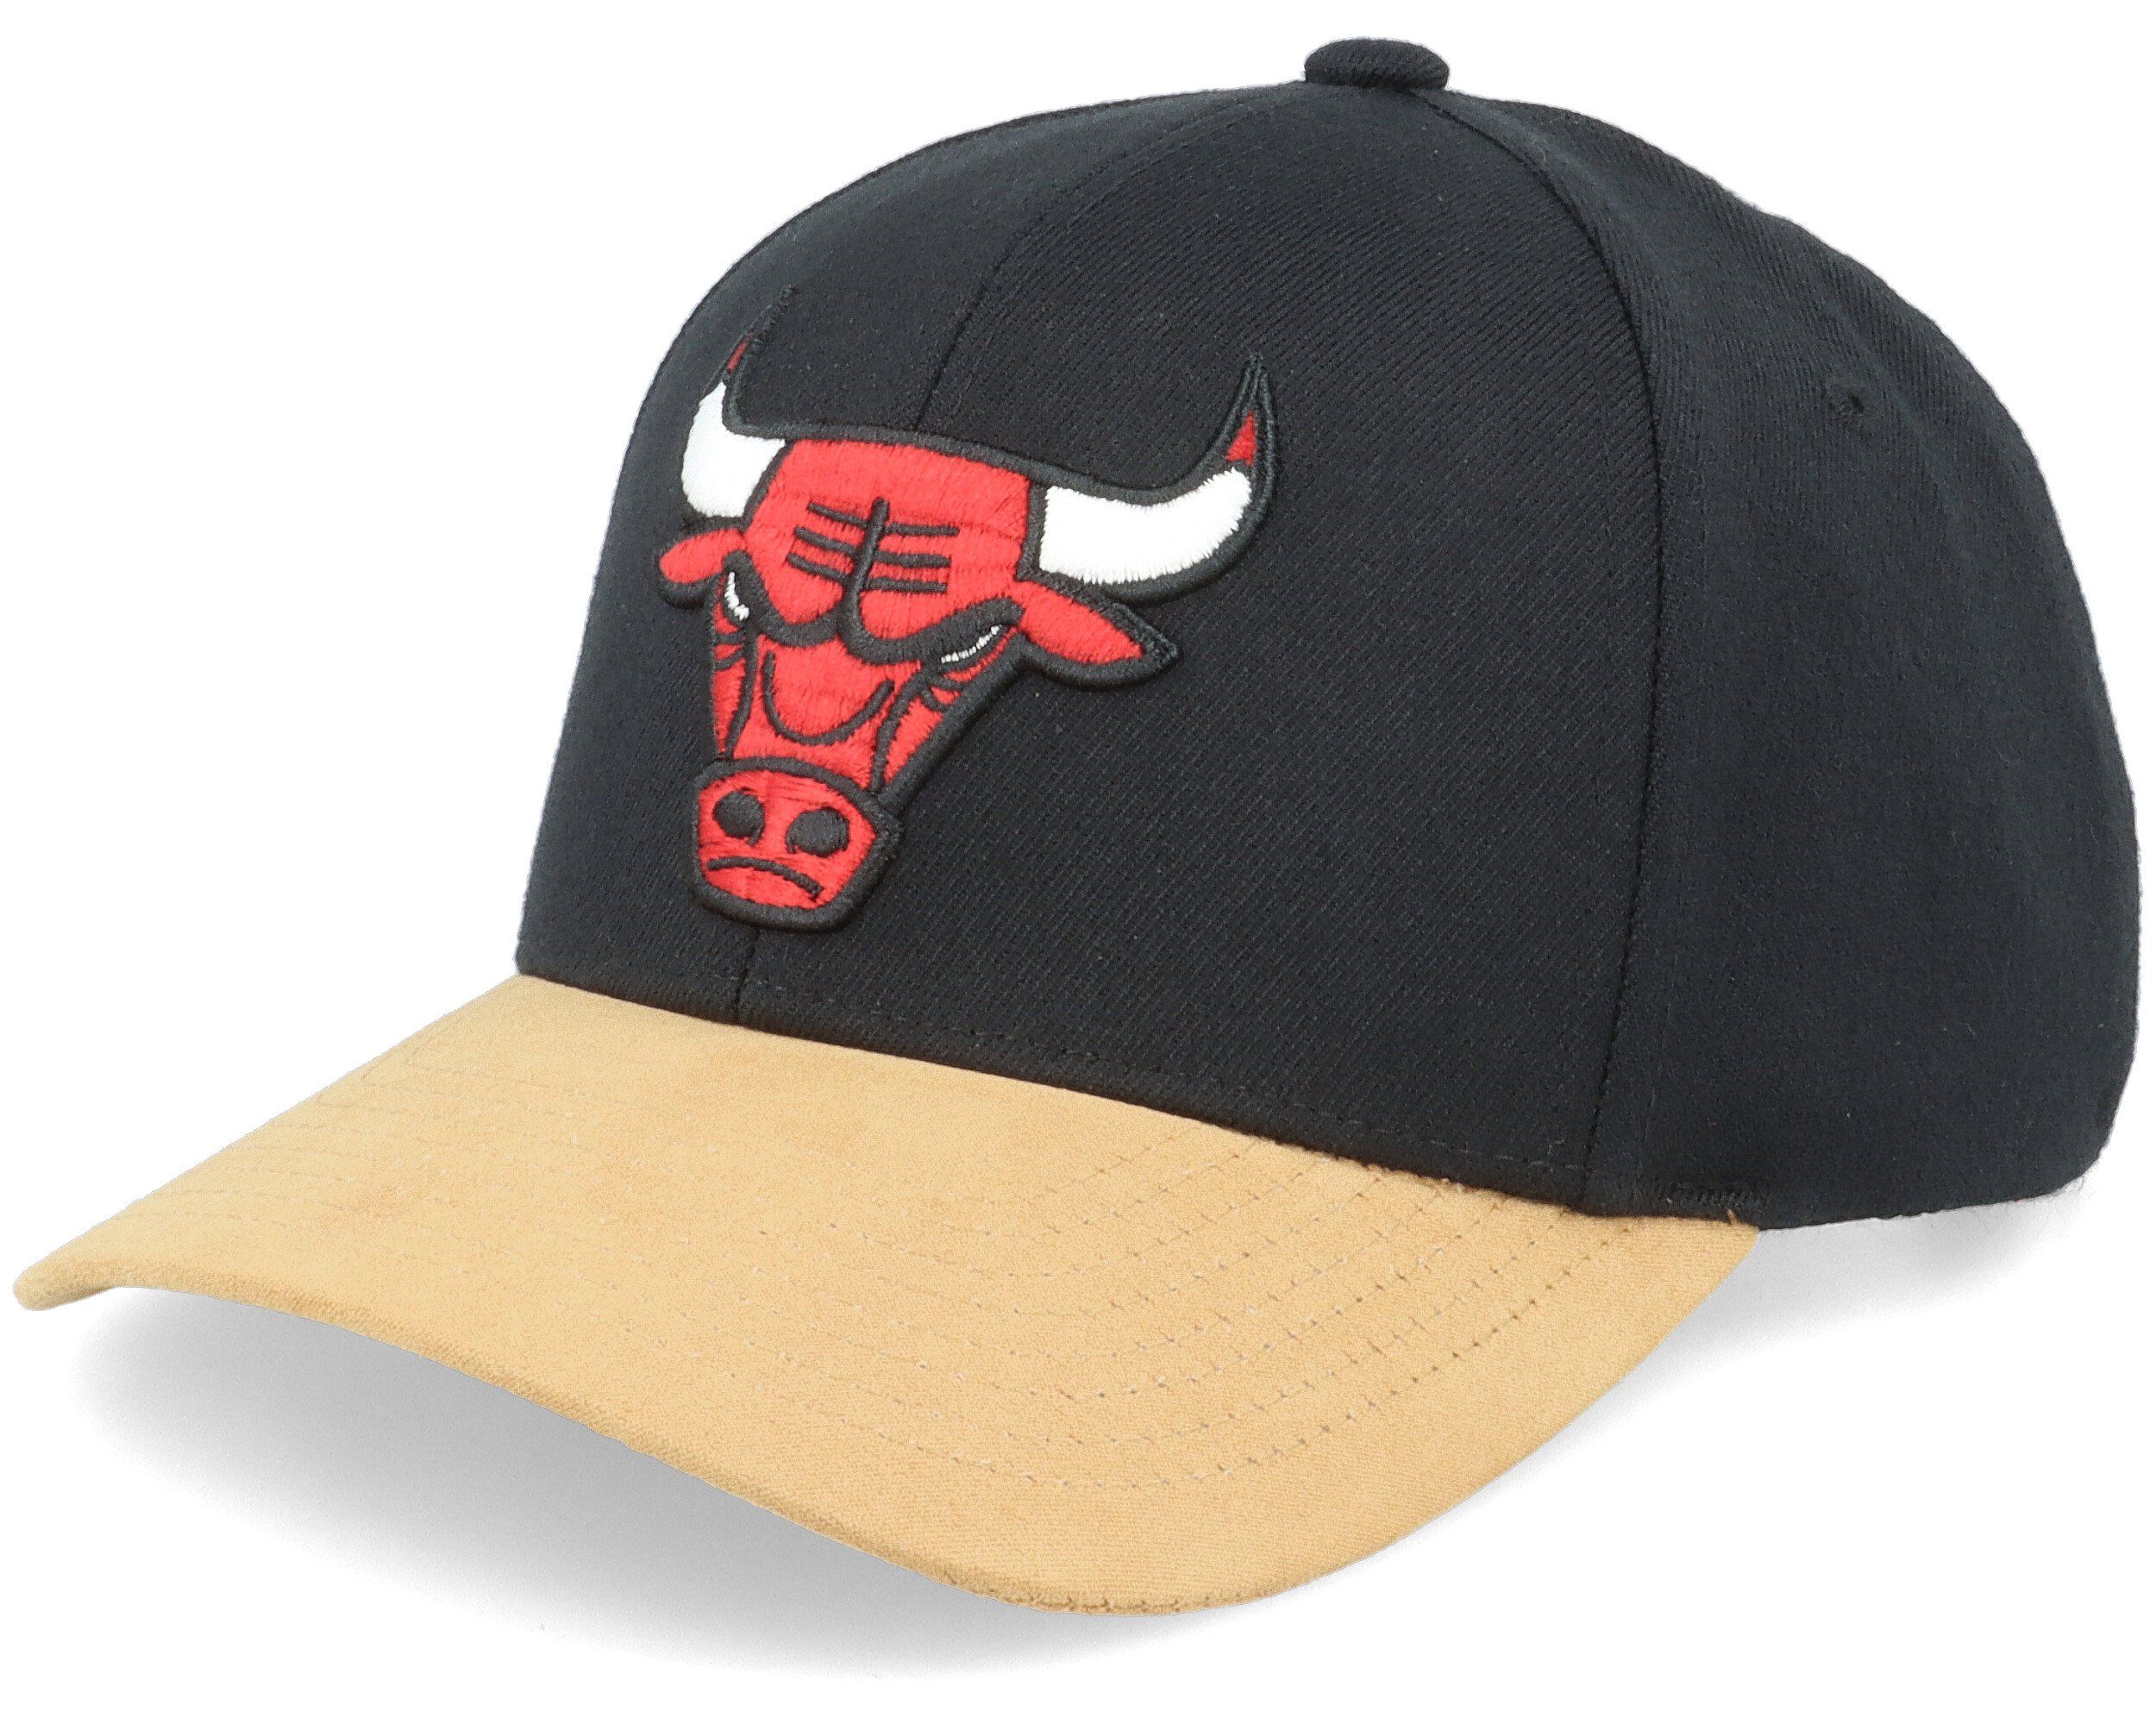 Chicago Bulls Suede hat by Mitchell & Ness-NWT